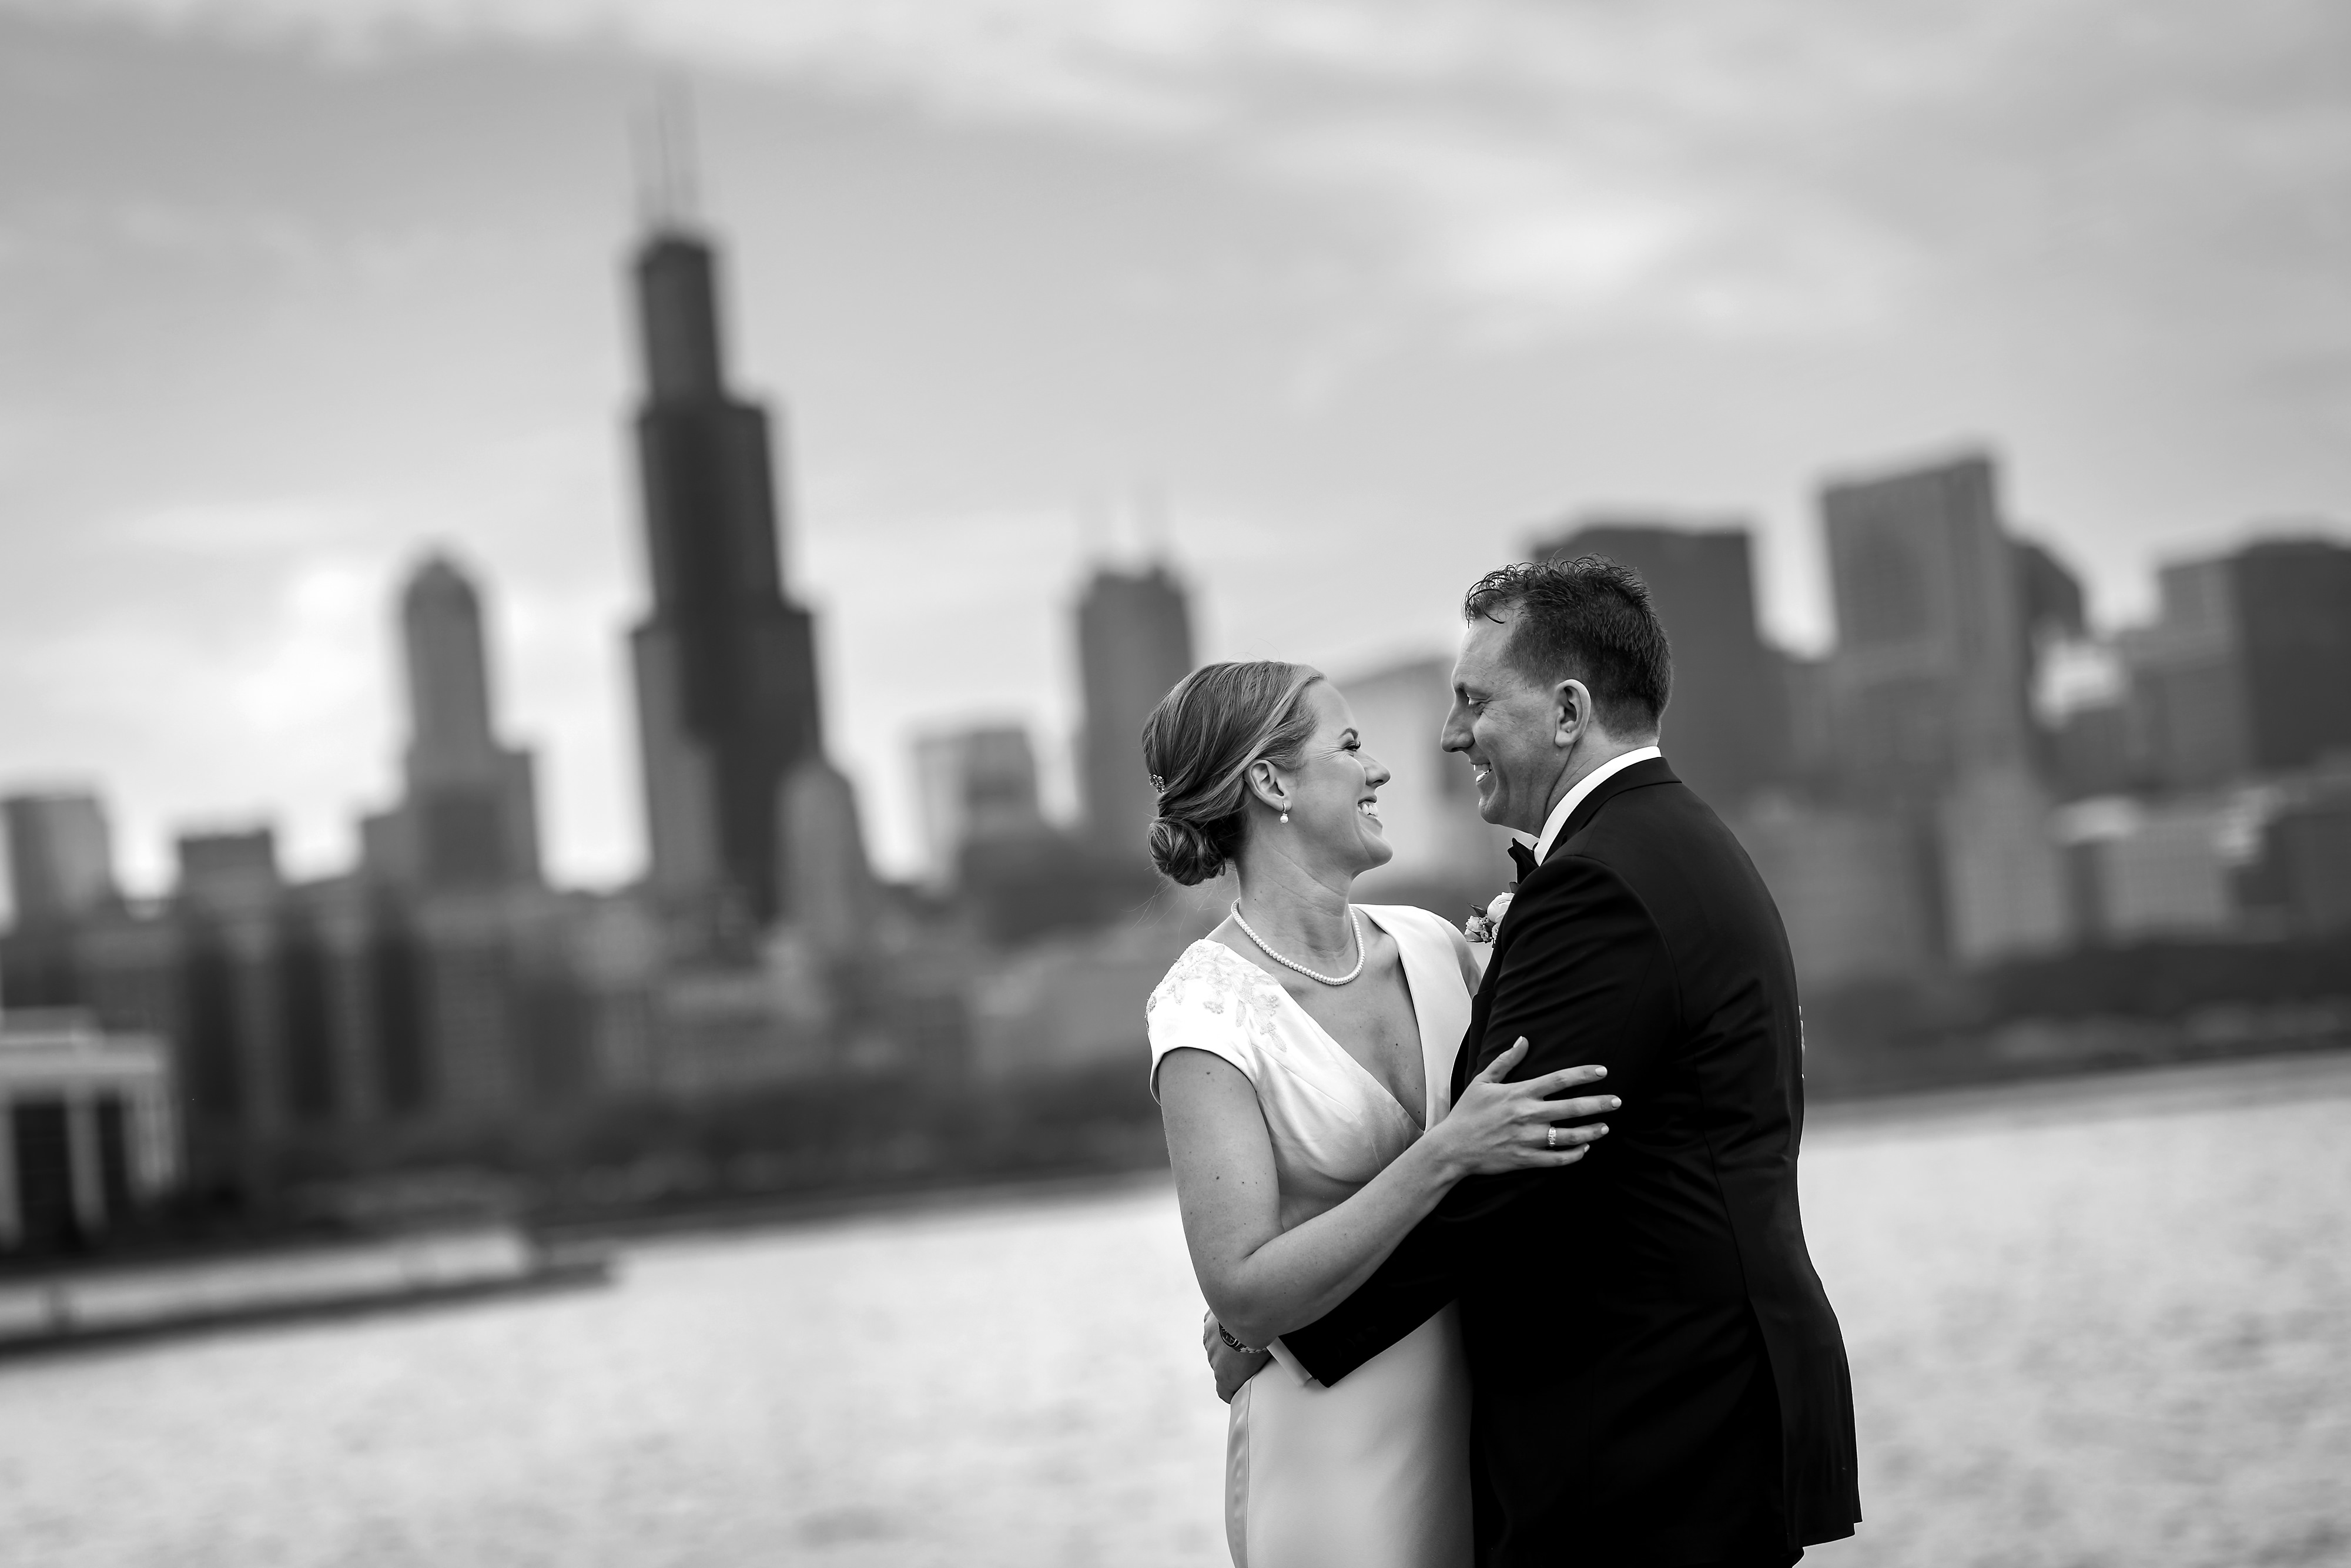 Bride and groom black and white photos with Sears Tower and Chicago Skyline from Museum Campus Adler Planetarium building